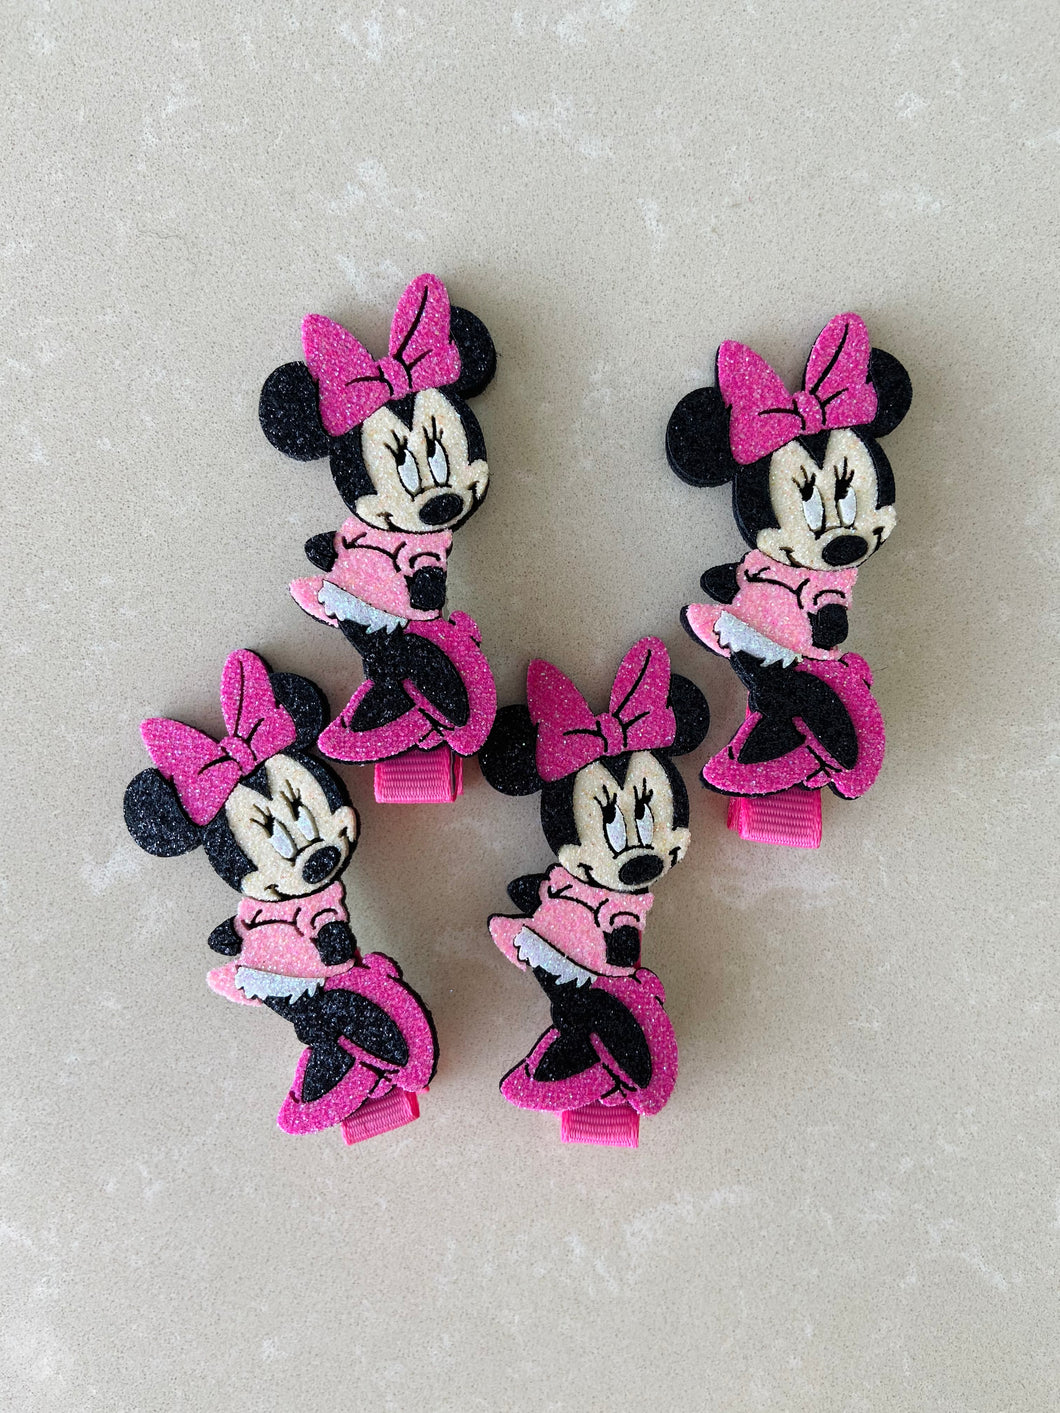 Pair of Minnie Mouse hair clips